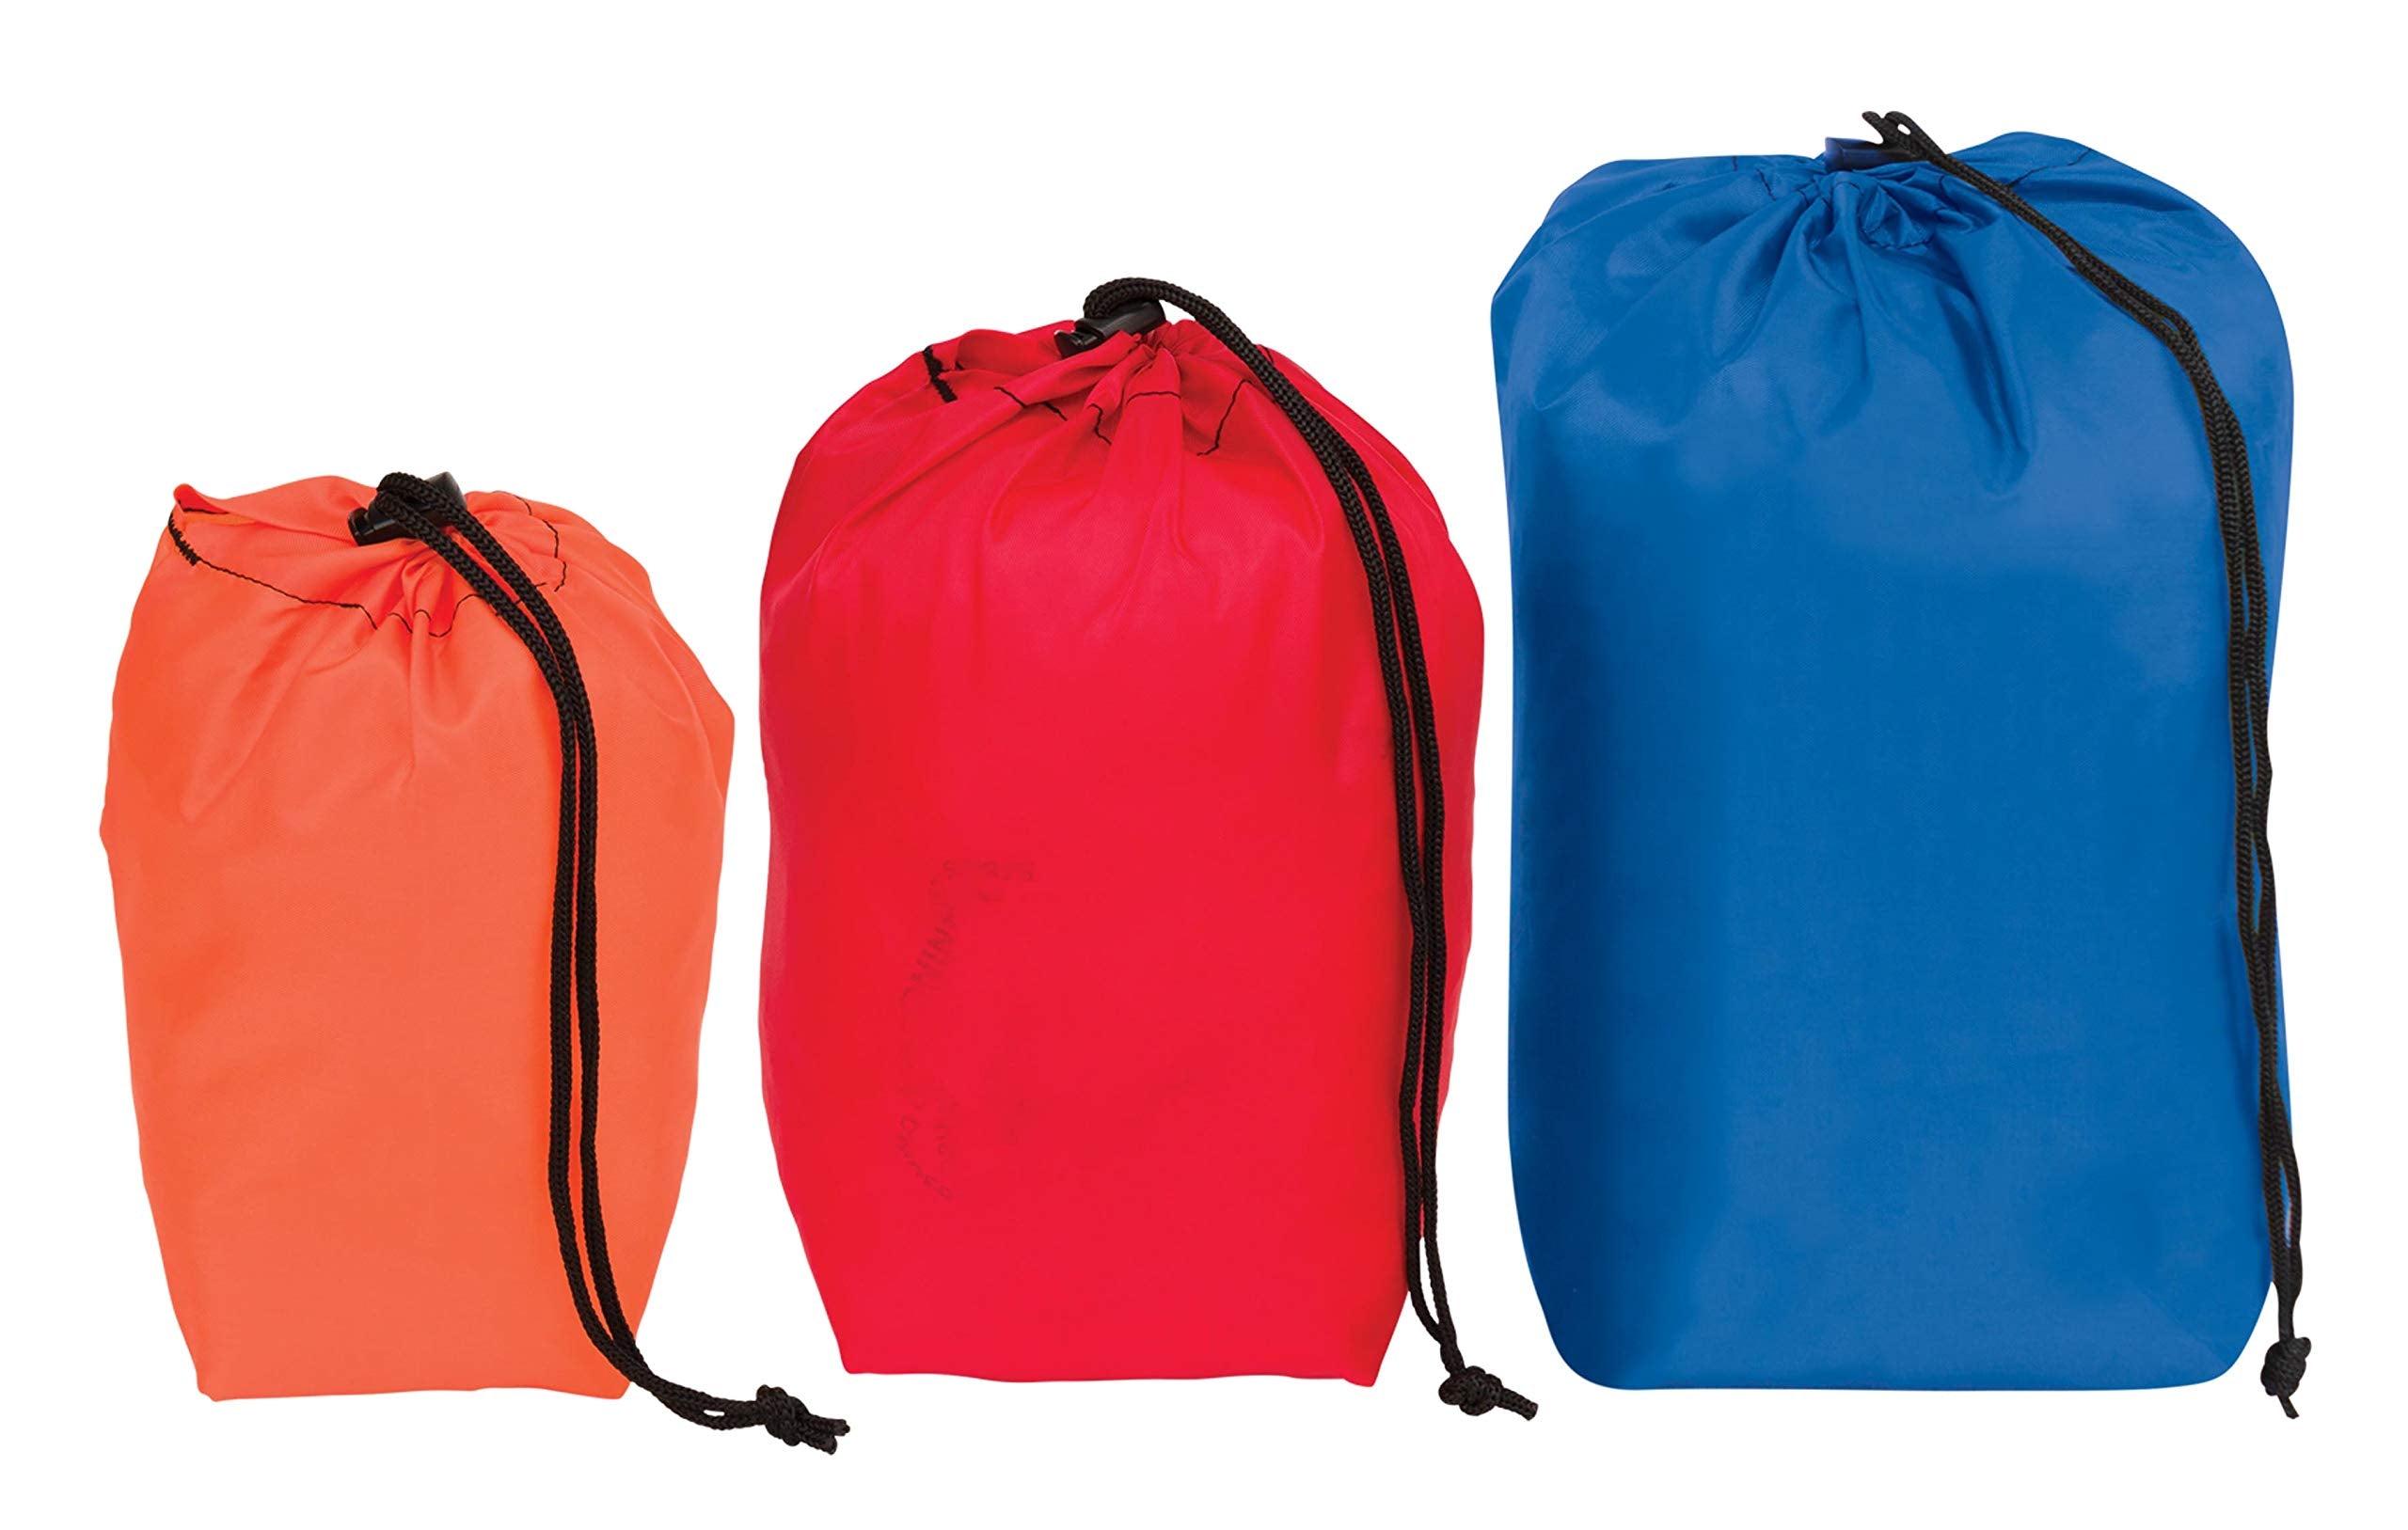 Outdoor Products Ditty Bag 3-Pack